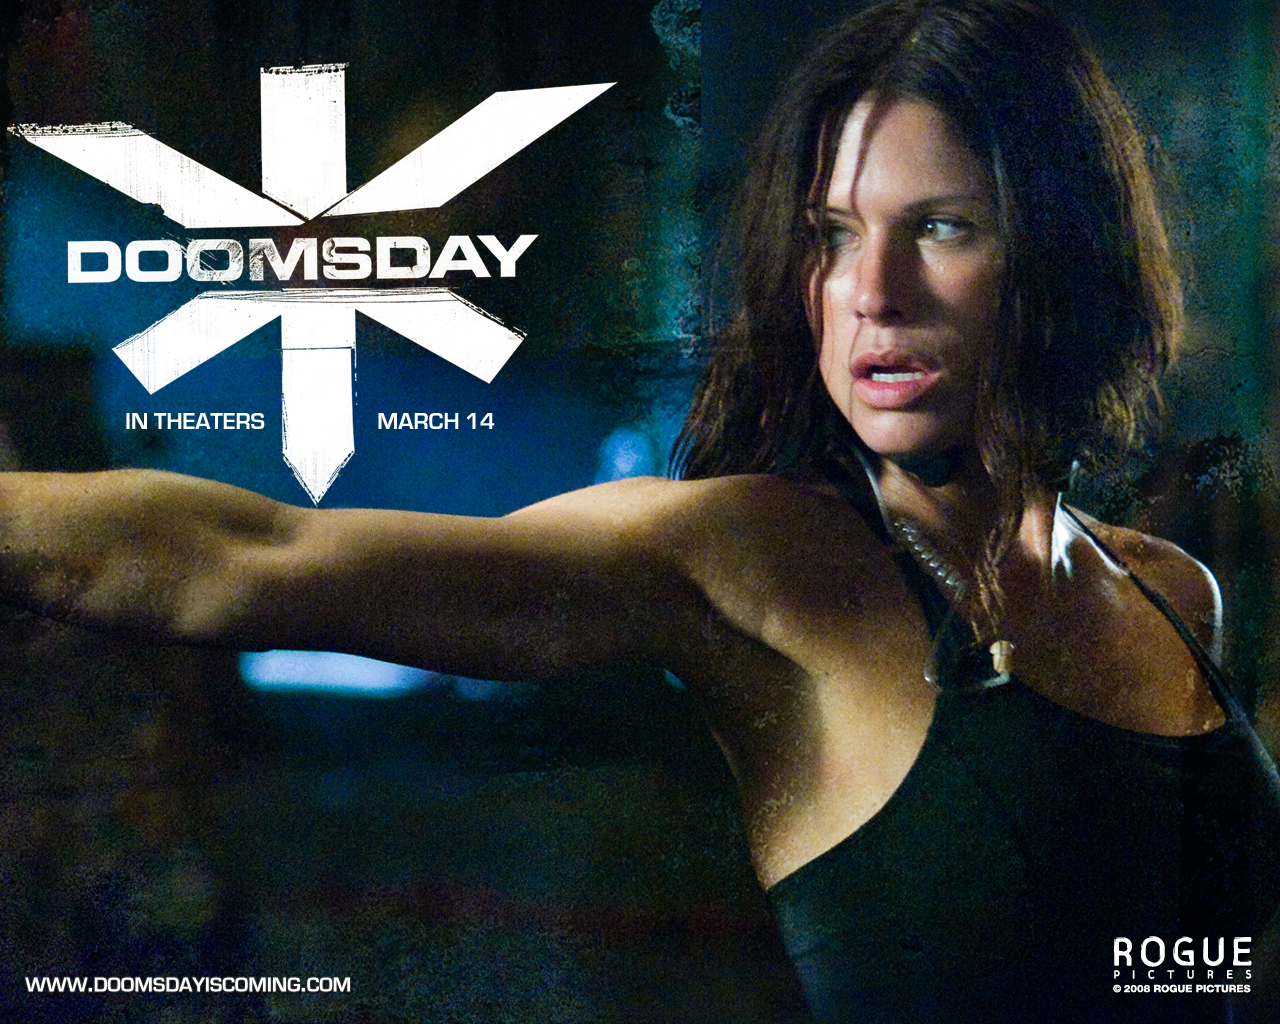 Download full size Doomsday wallpaper / Movies / 1280x1024